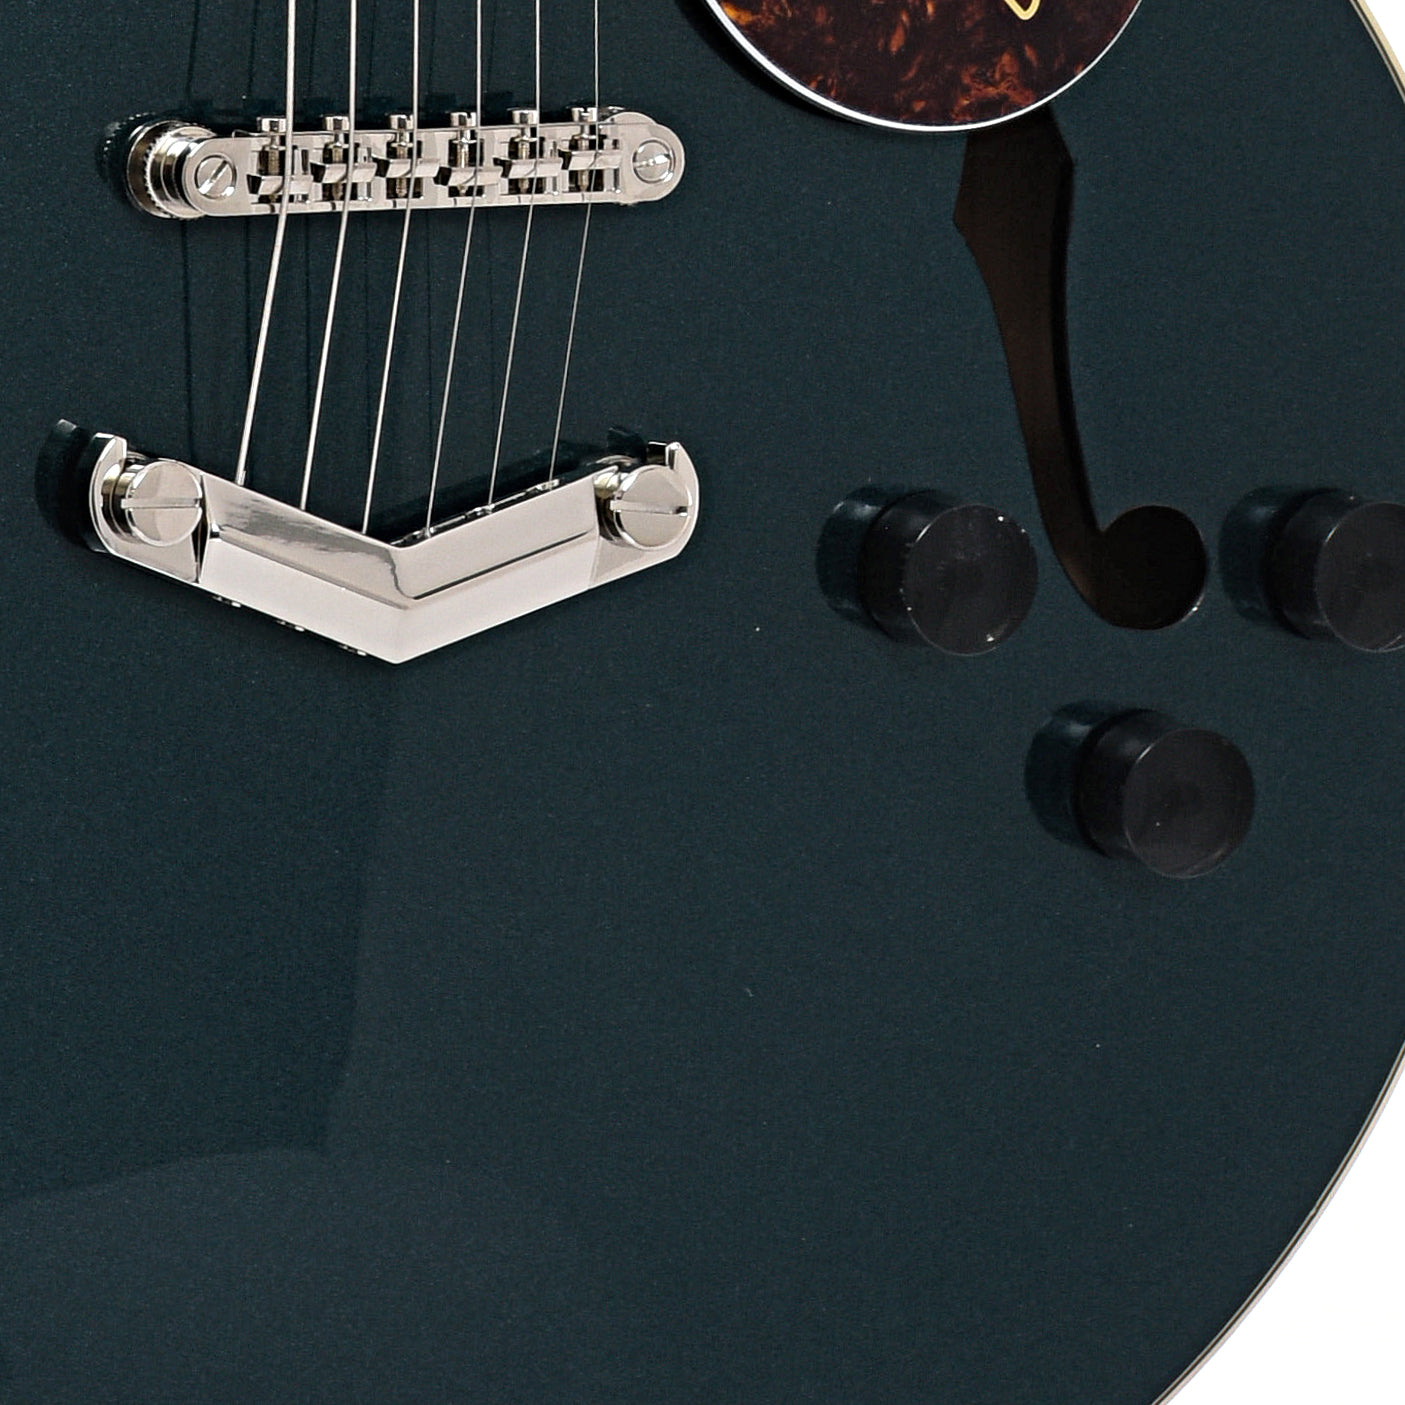 Image 4 of Gretsch G2622 Streamliner Center-Block Double Cutaway Hollow Body Guitar, Midnight Sapphire- SKU# G2622-MDSPH : Product Type Hollow Body Electric Guitars : Elderly Instruments